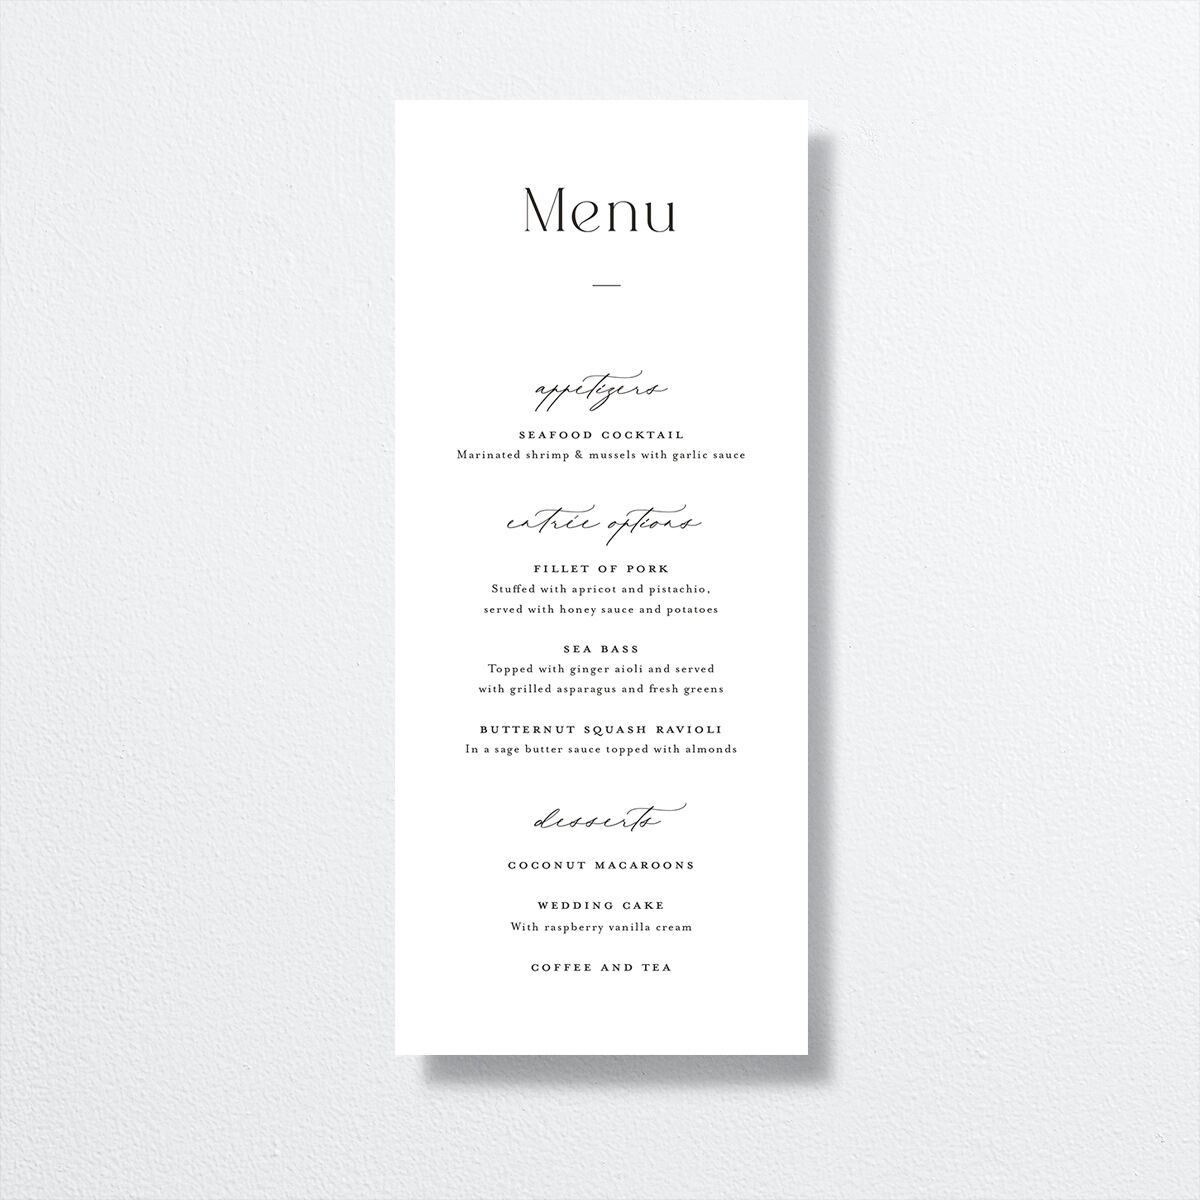 Refined Menus front in white